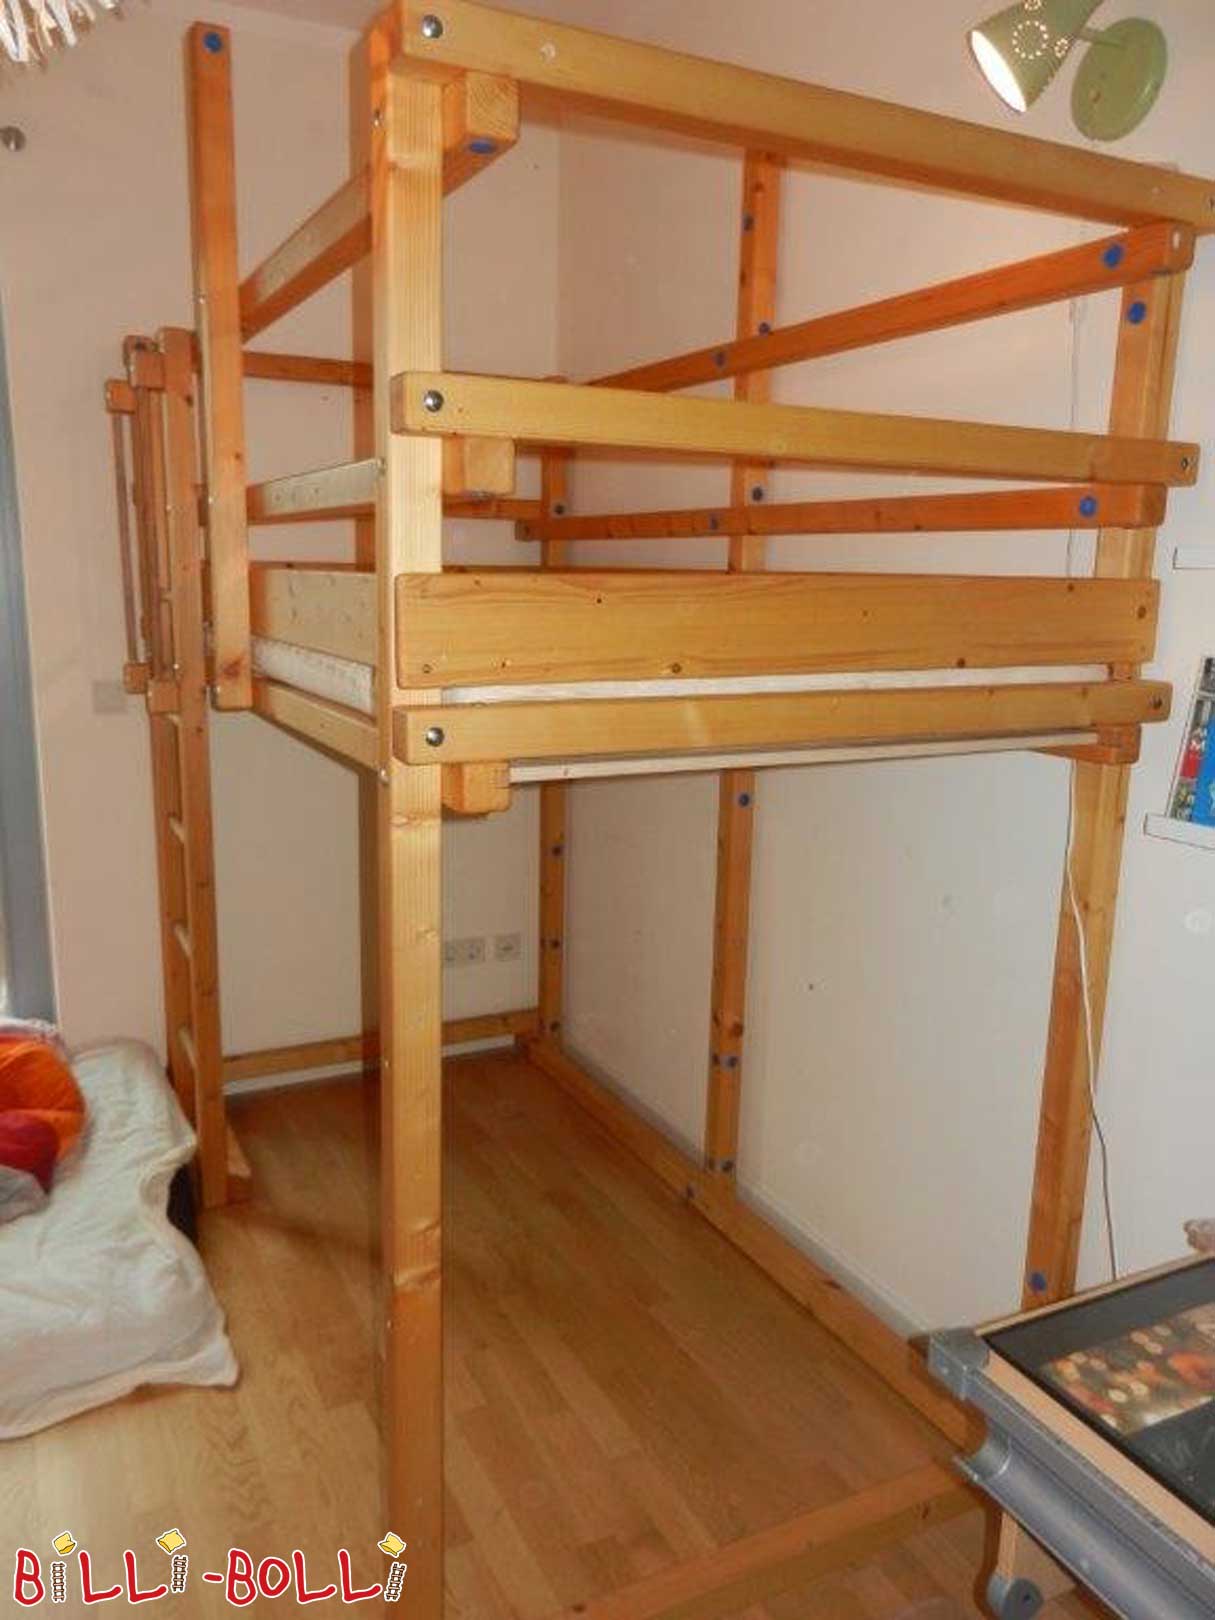 Loft bed growing with the child, 100 x 200 cm, oiled-waxed spruce (Category: second hand loft bed)